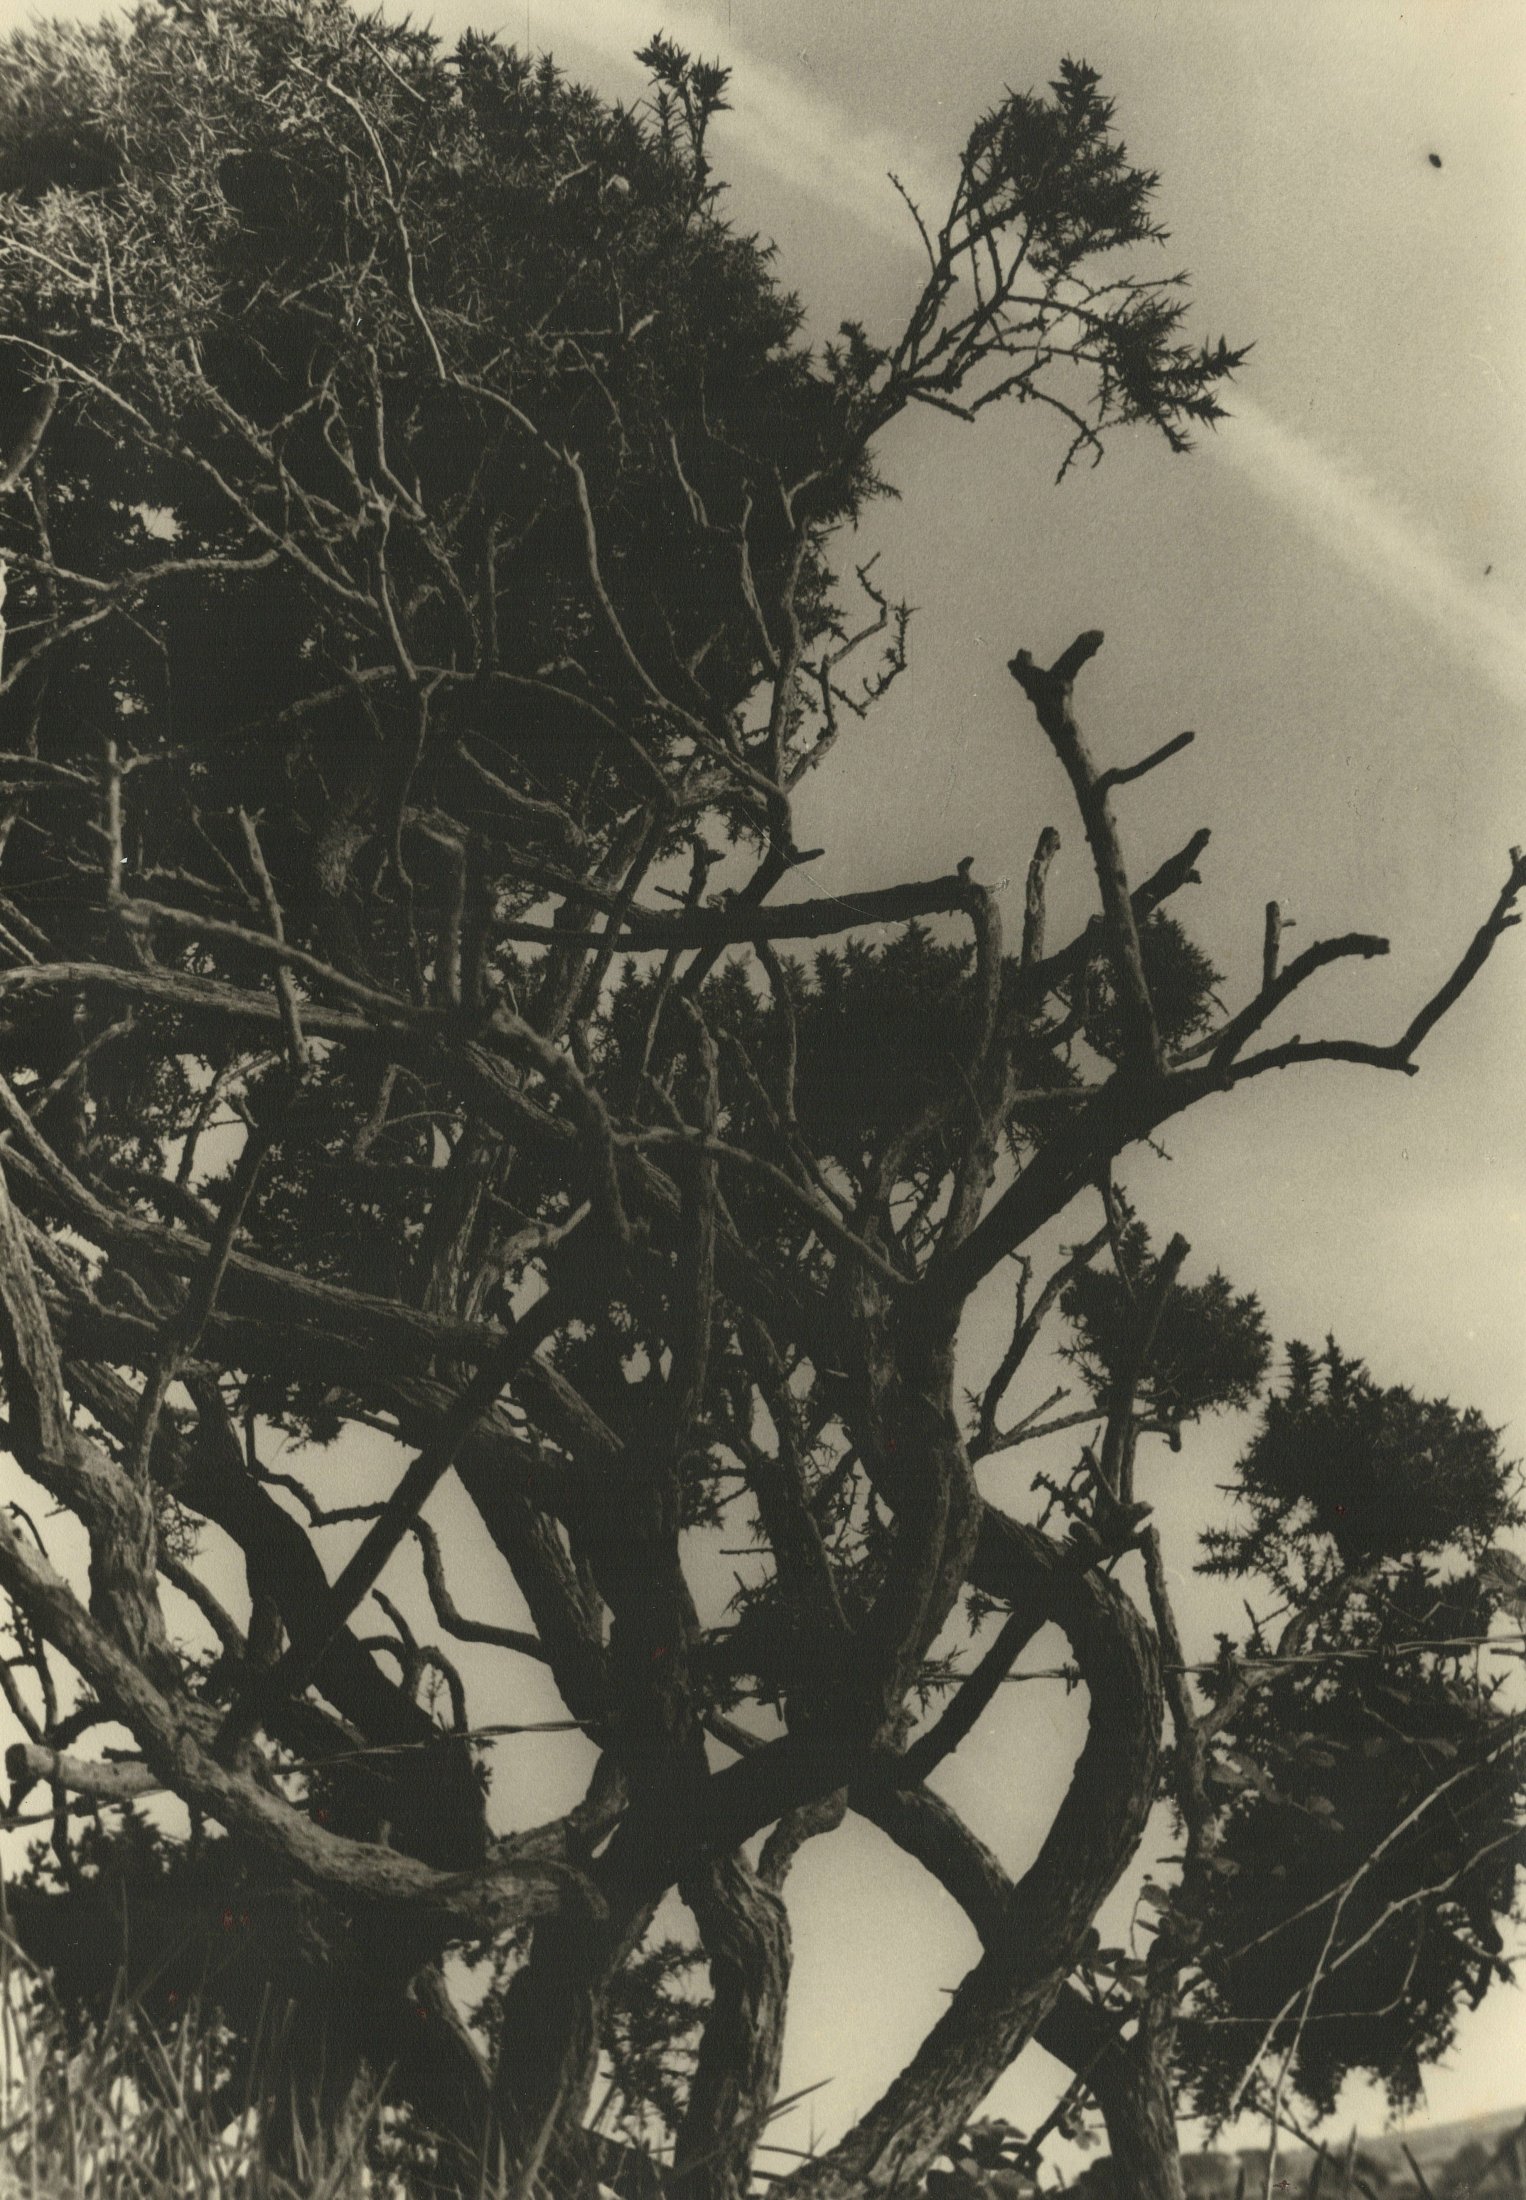 Jet Trail Gorse And Barbed Wire Near Lanyon Quiot 1960s By Andrew Lanyon